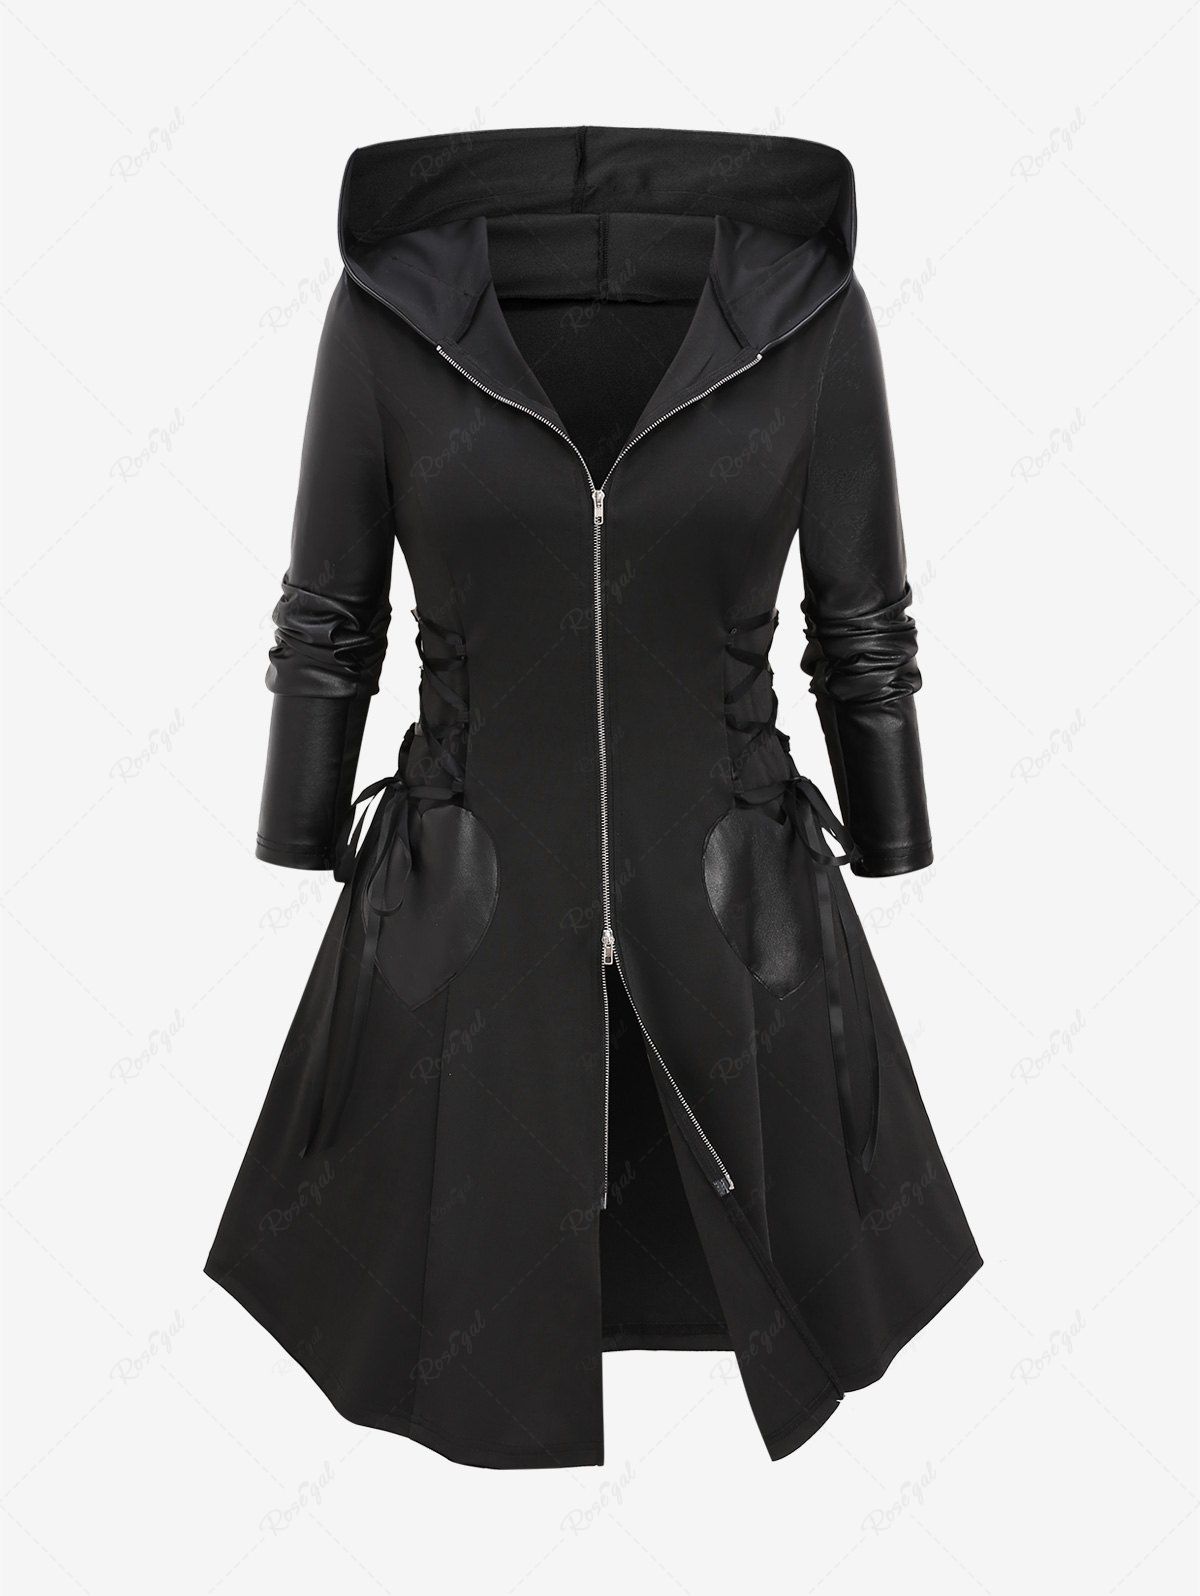 Chic Plus Size Lace Up PU Leather Patchwork Hooded Zipper Coat  